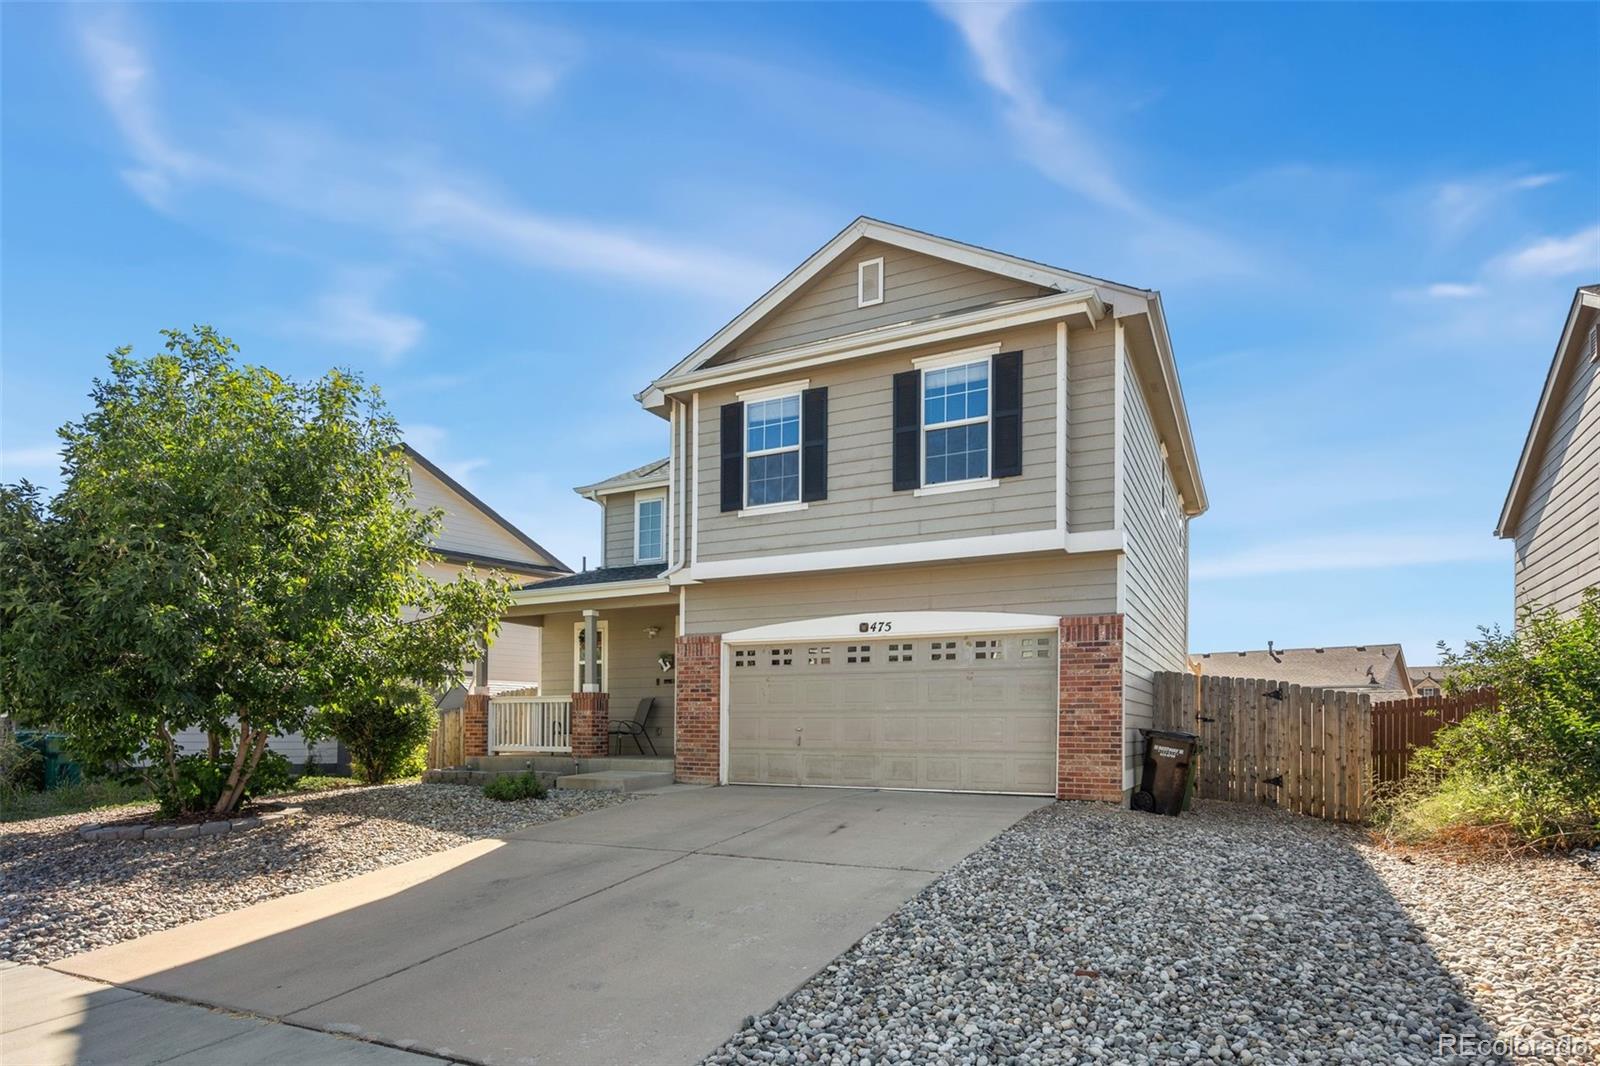 Report Image for 475  Winebrook Way,Fountain, Colorado